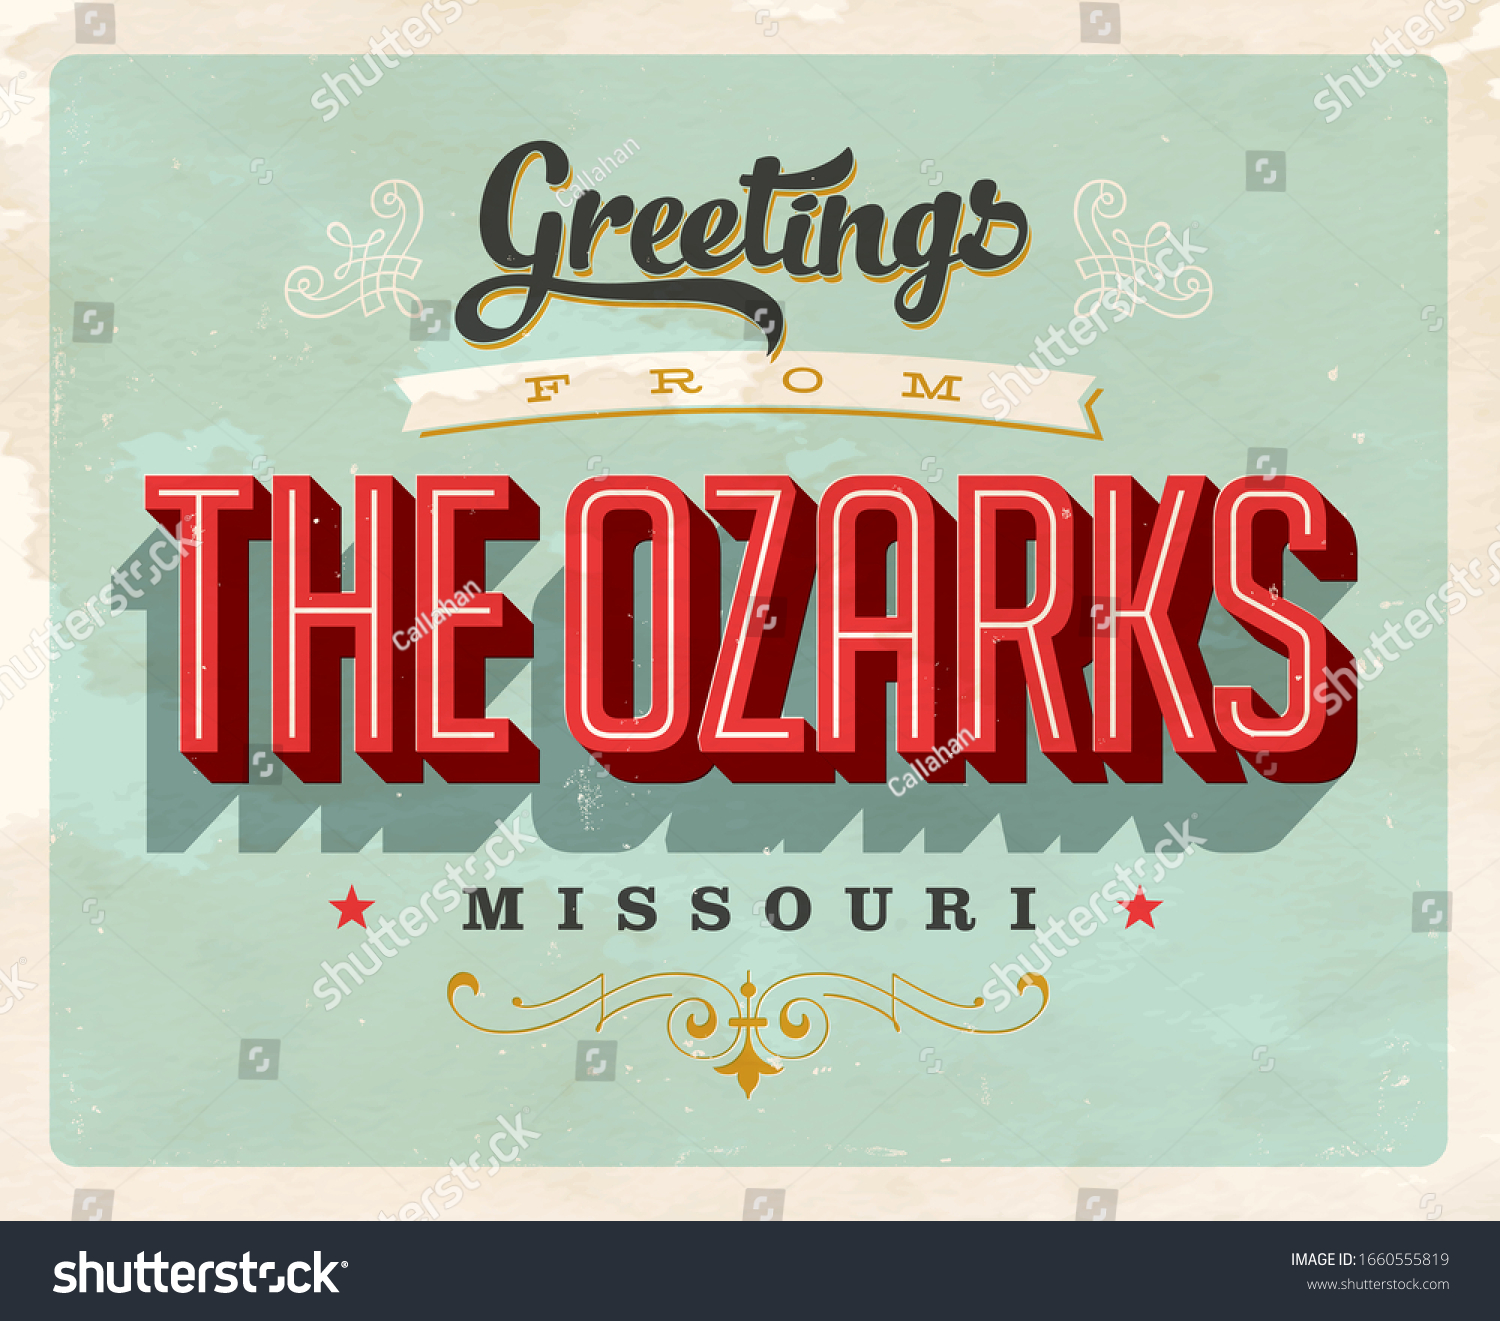 SVG of Vintage Touristic Greeting Card - Vector EPS10. Grunge effects can be easily removed for a brand new, clean sign. svg